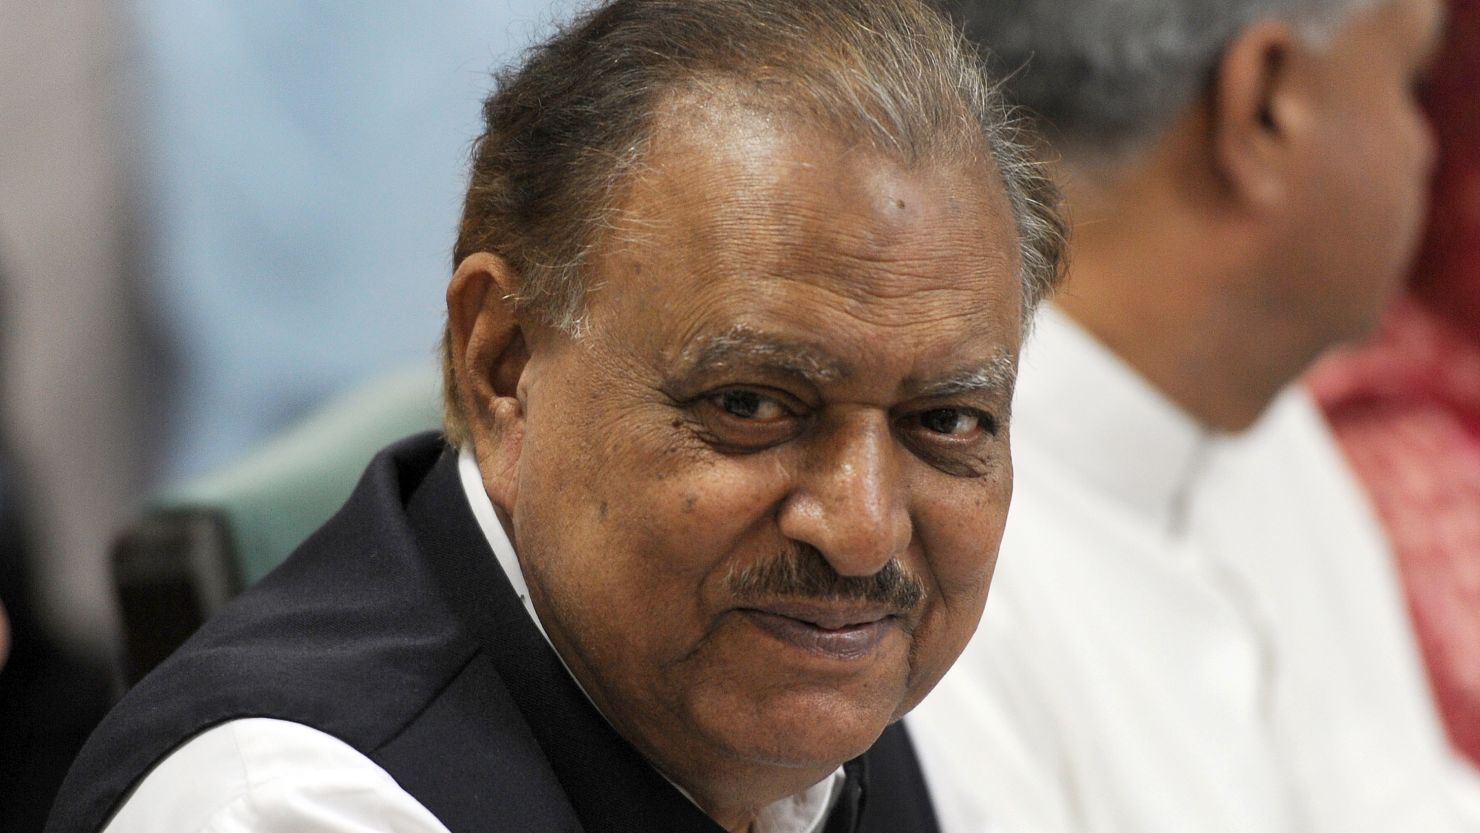 Mamnoon Hussain is elected to the largely ceremonial role in a vote by federal and provincial officials across the country.